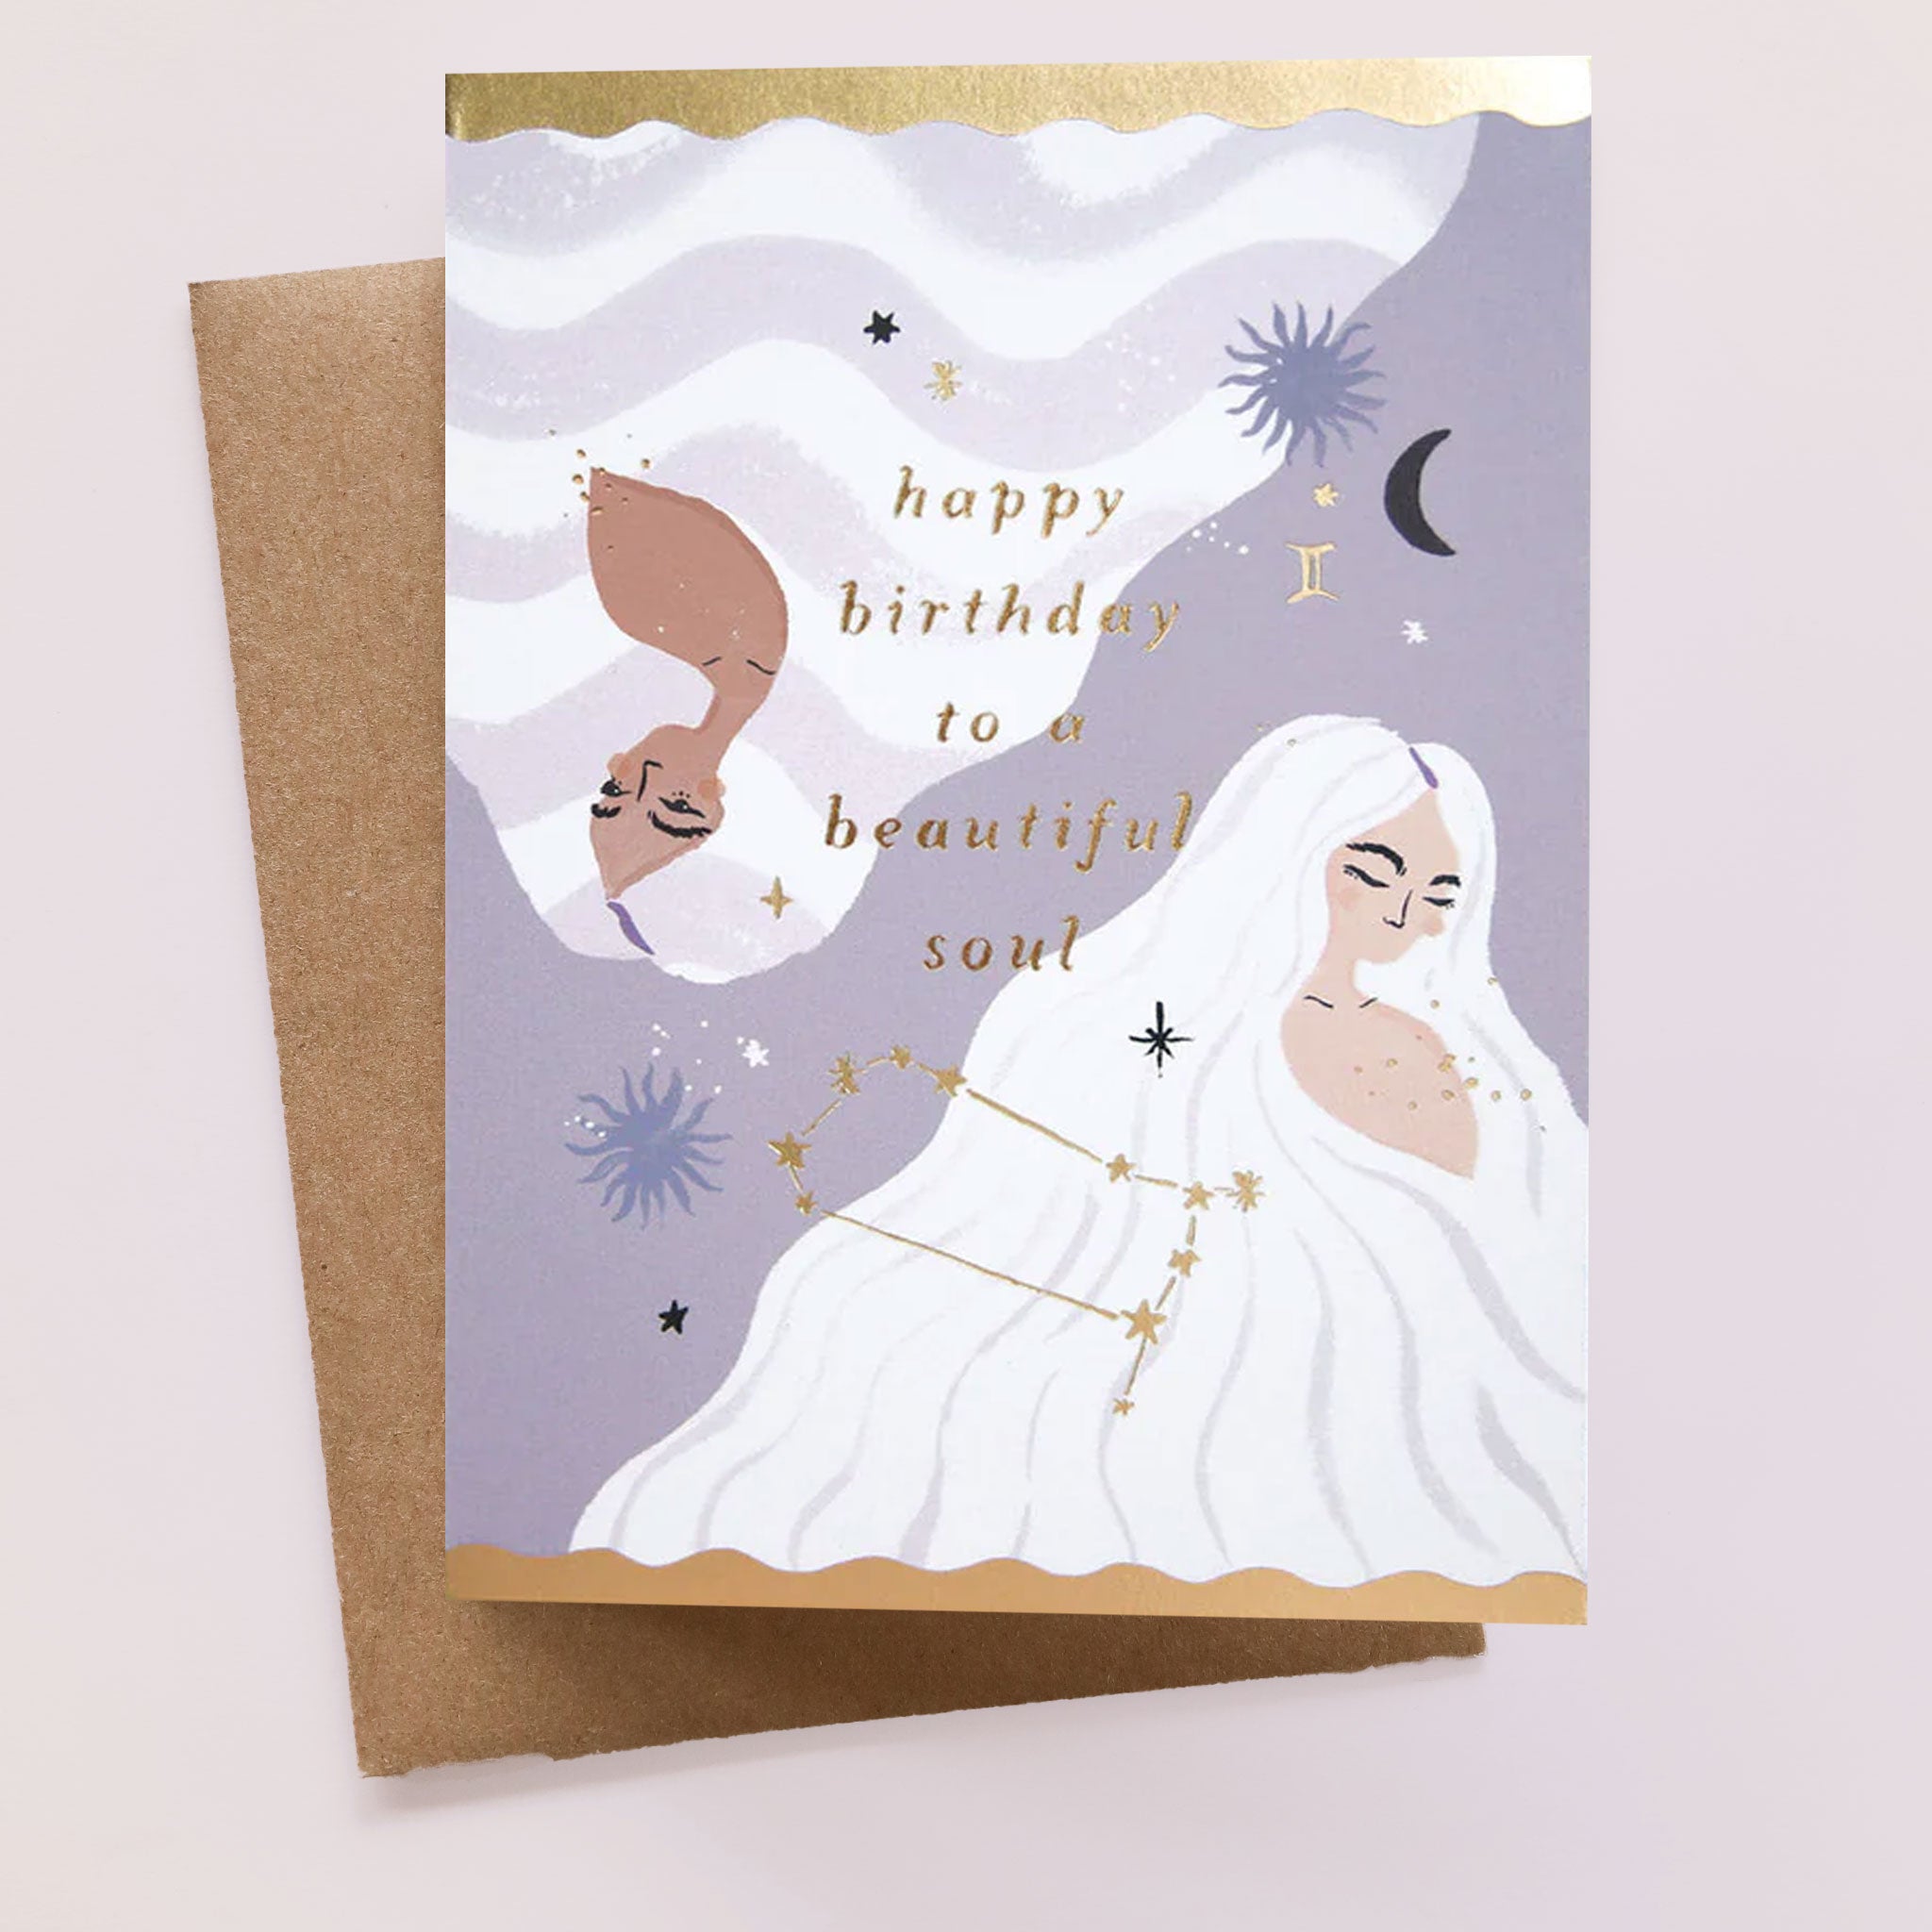 On a neutral background is a card with a woman on the front and gold text that reads, "happy birthday to a beautiful soul" along with star and moon illustrations. 